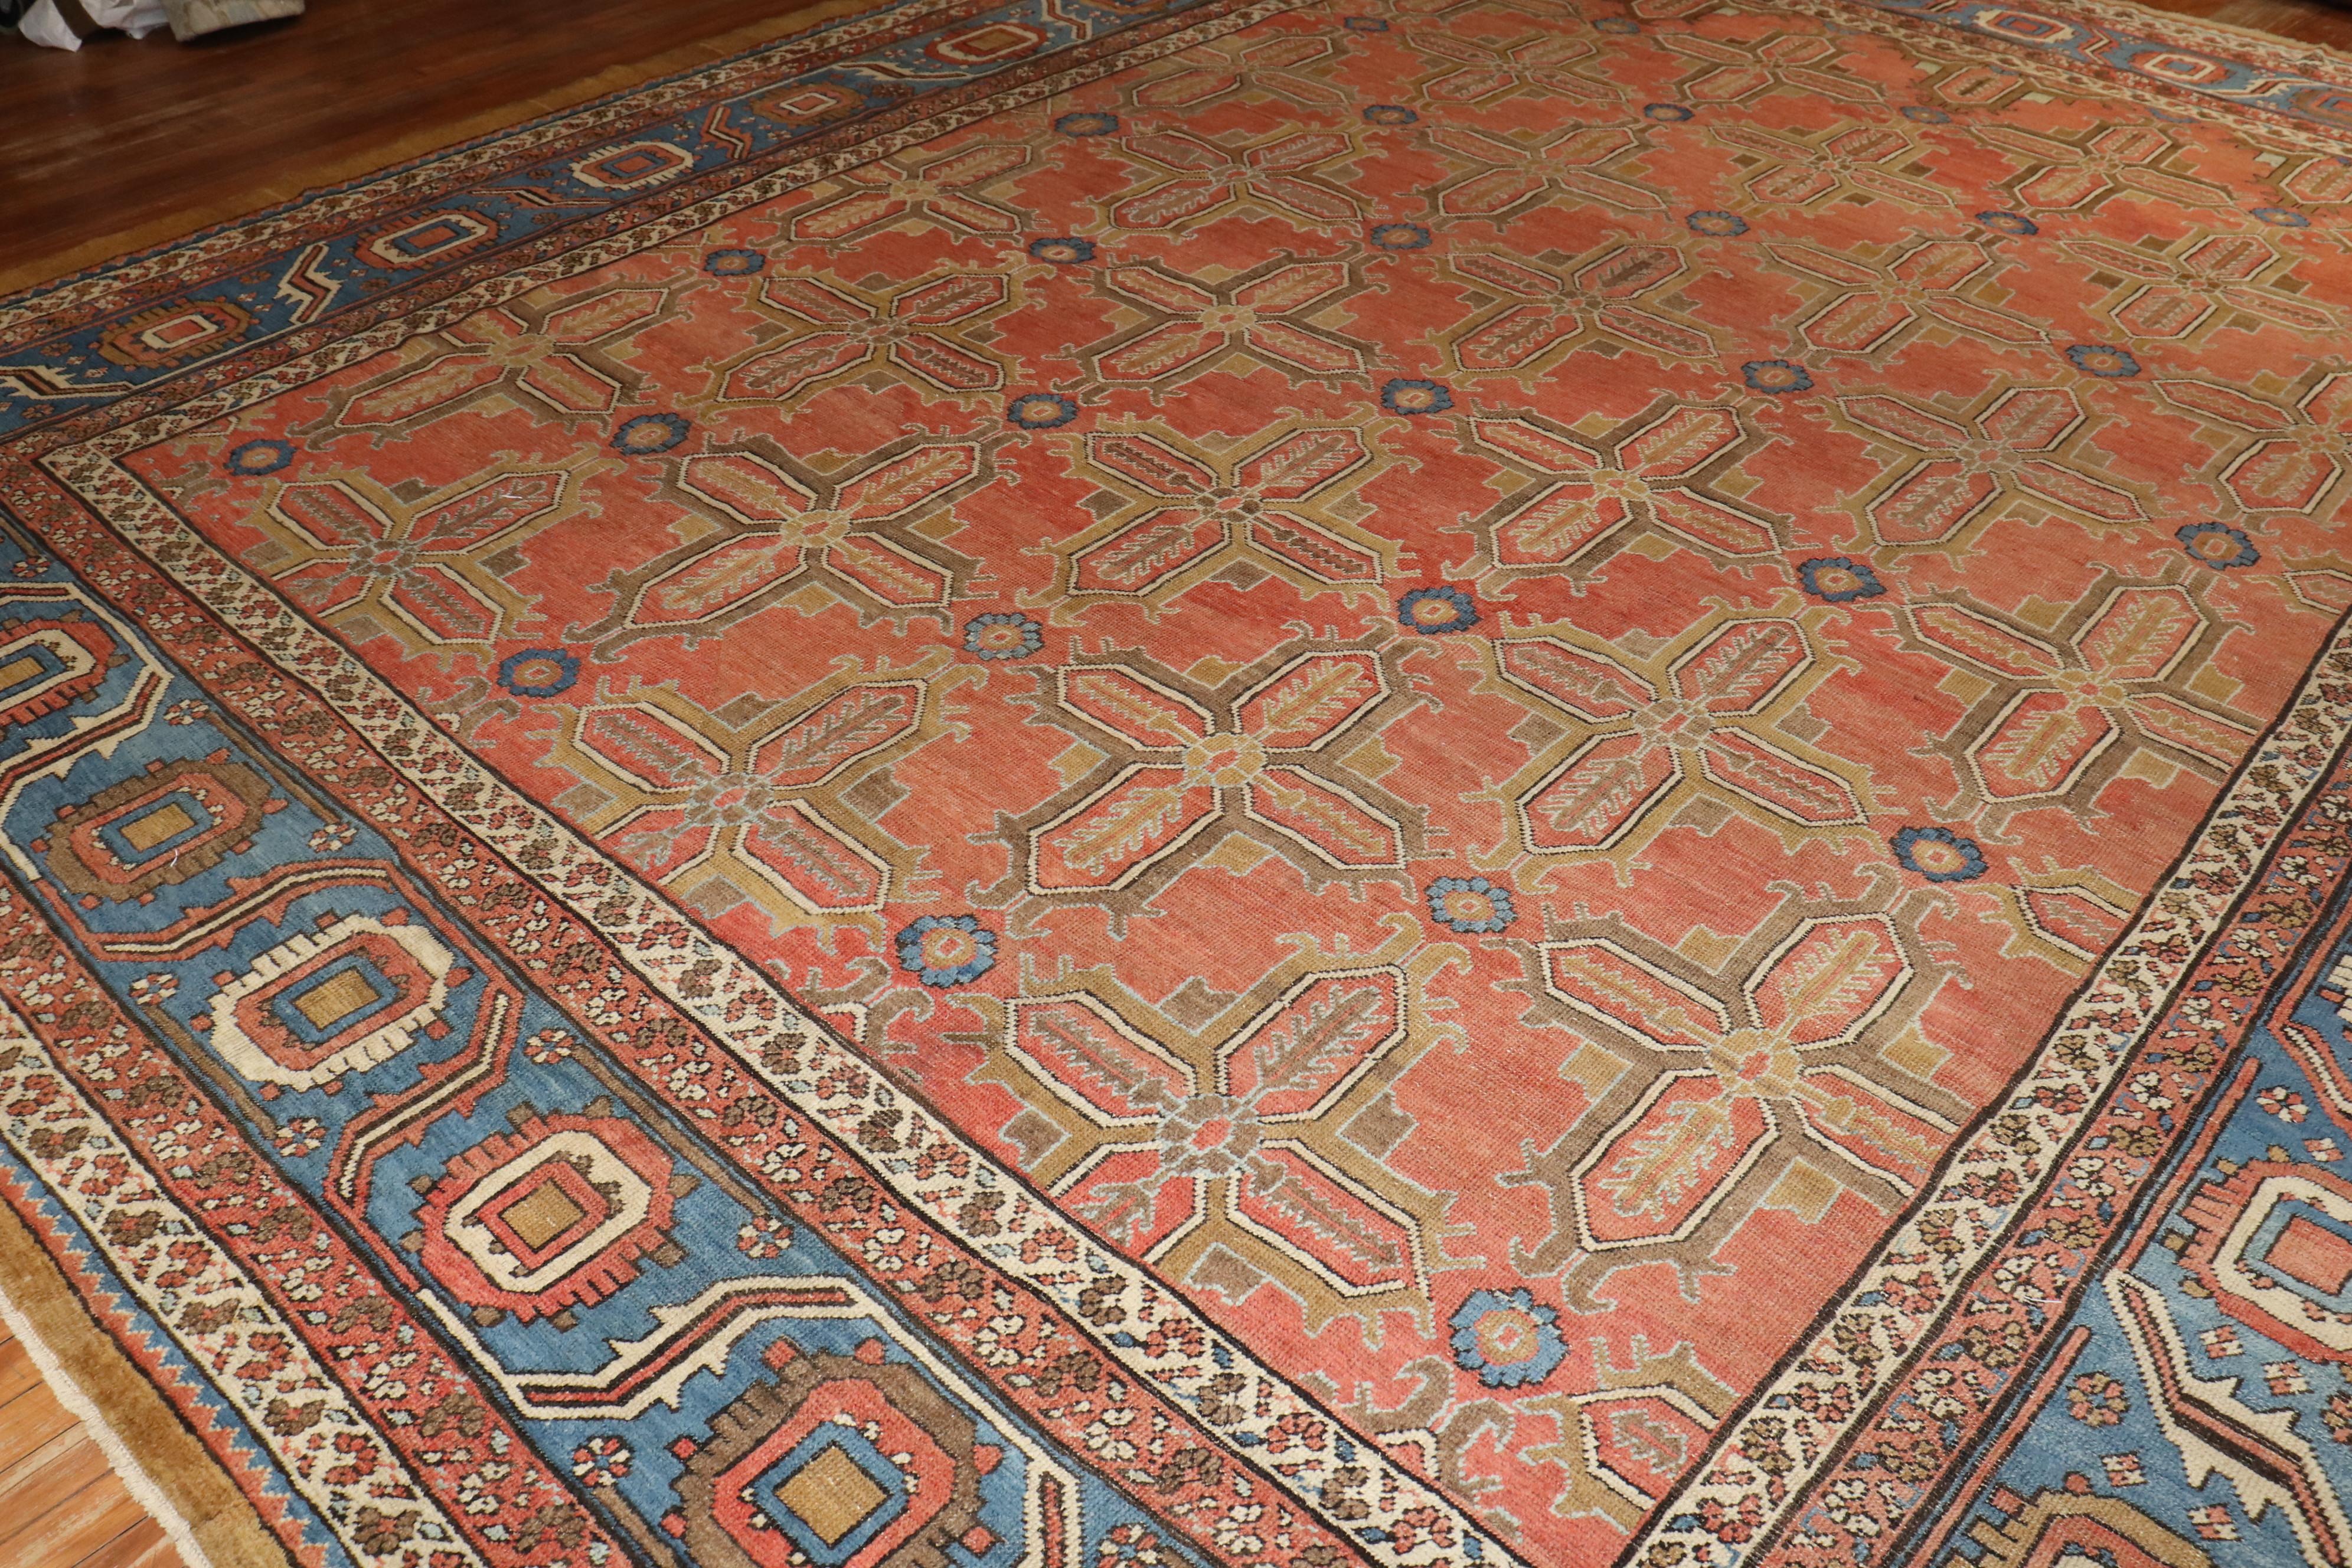 Zabihi Collection Antique Persian Bakshaish Rug In Good Condition For Sale In New York, NY